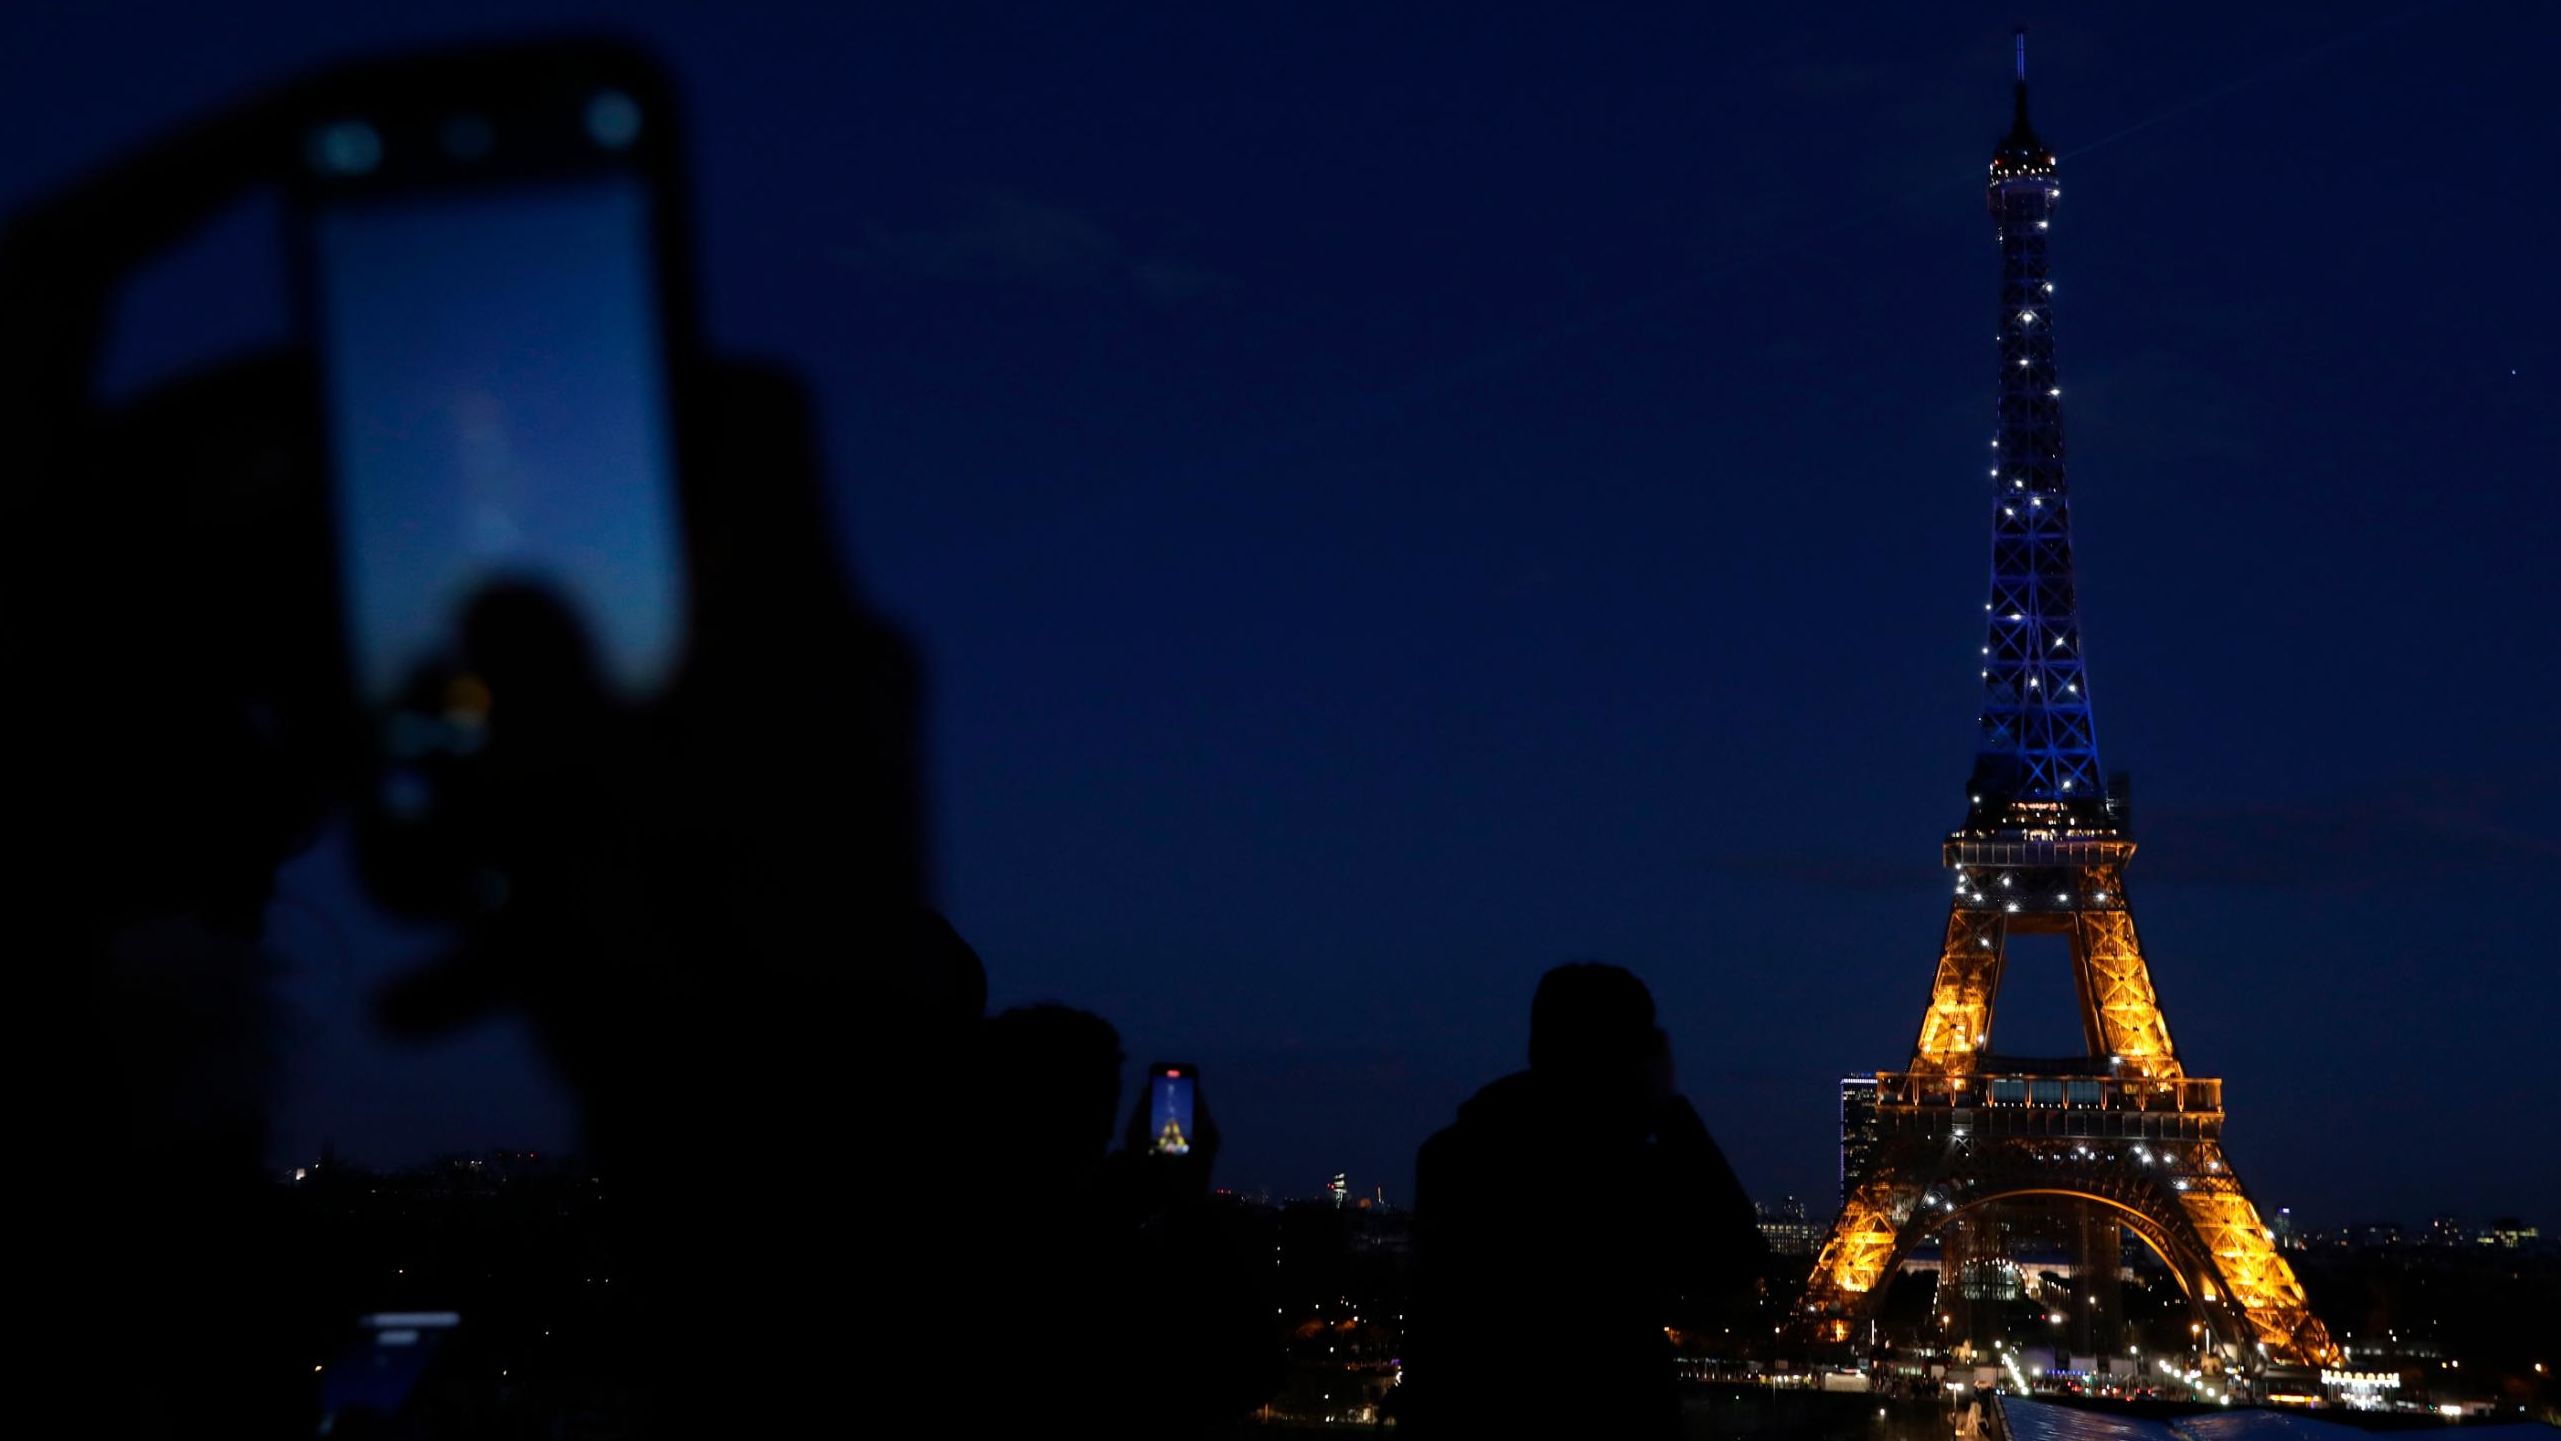 People photograph Paris' Eiffel Tower as it is lit with Ukraine's colors on February 25.